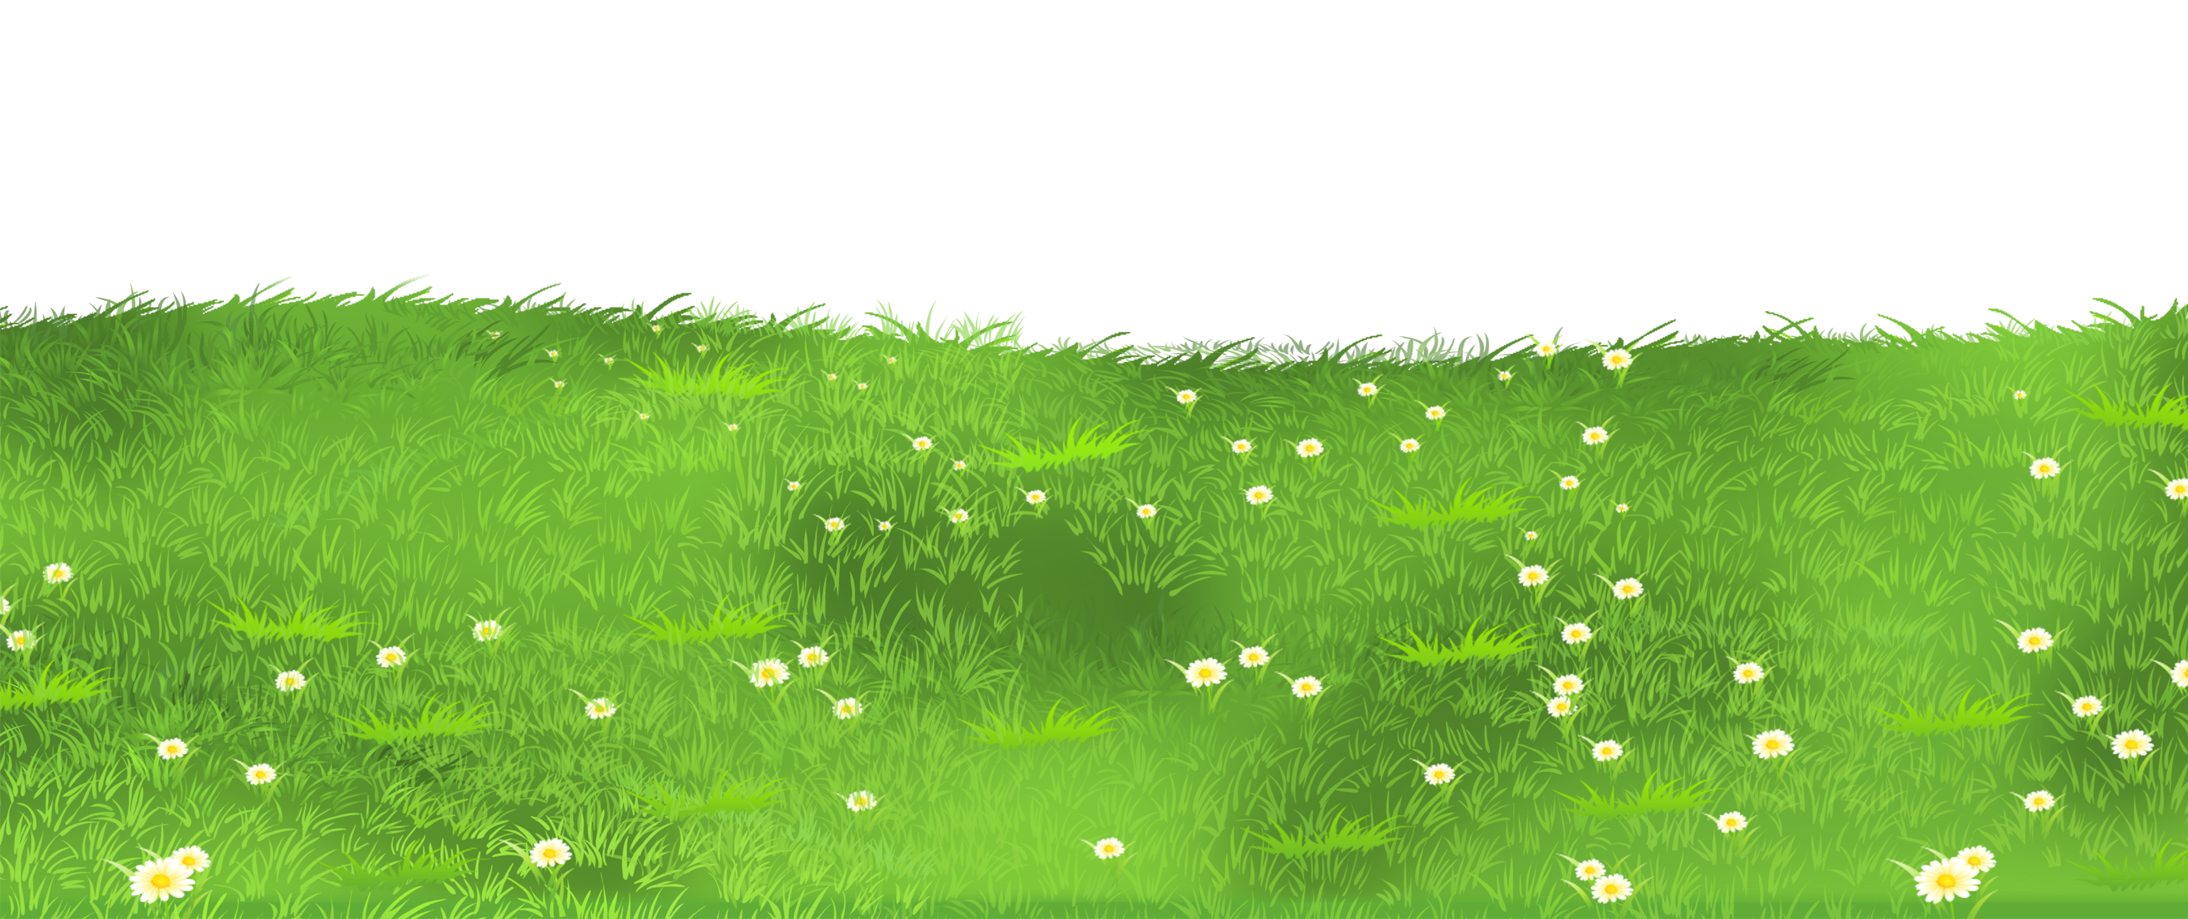 Free Grass Image Download Png Clipart